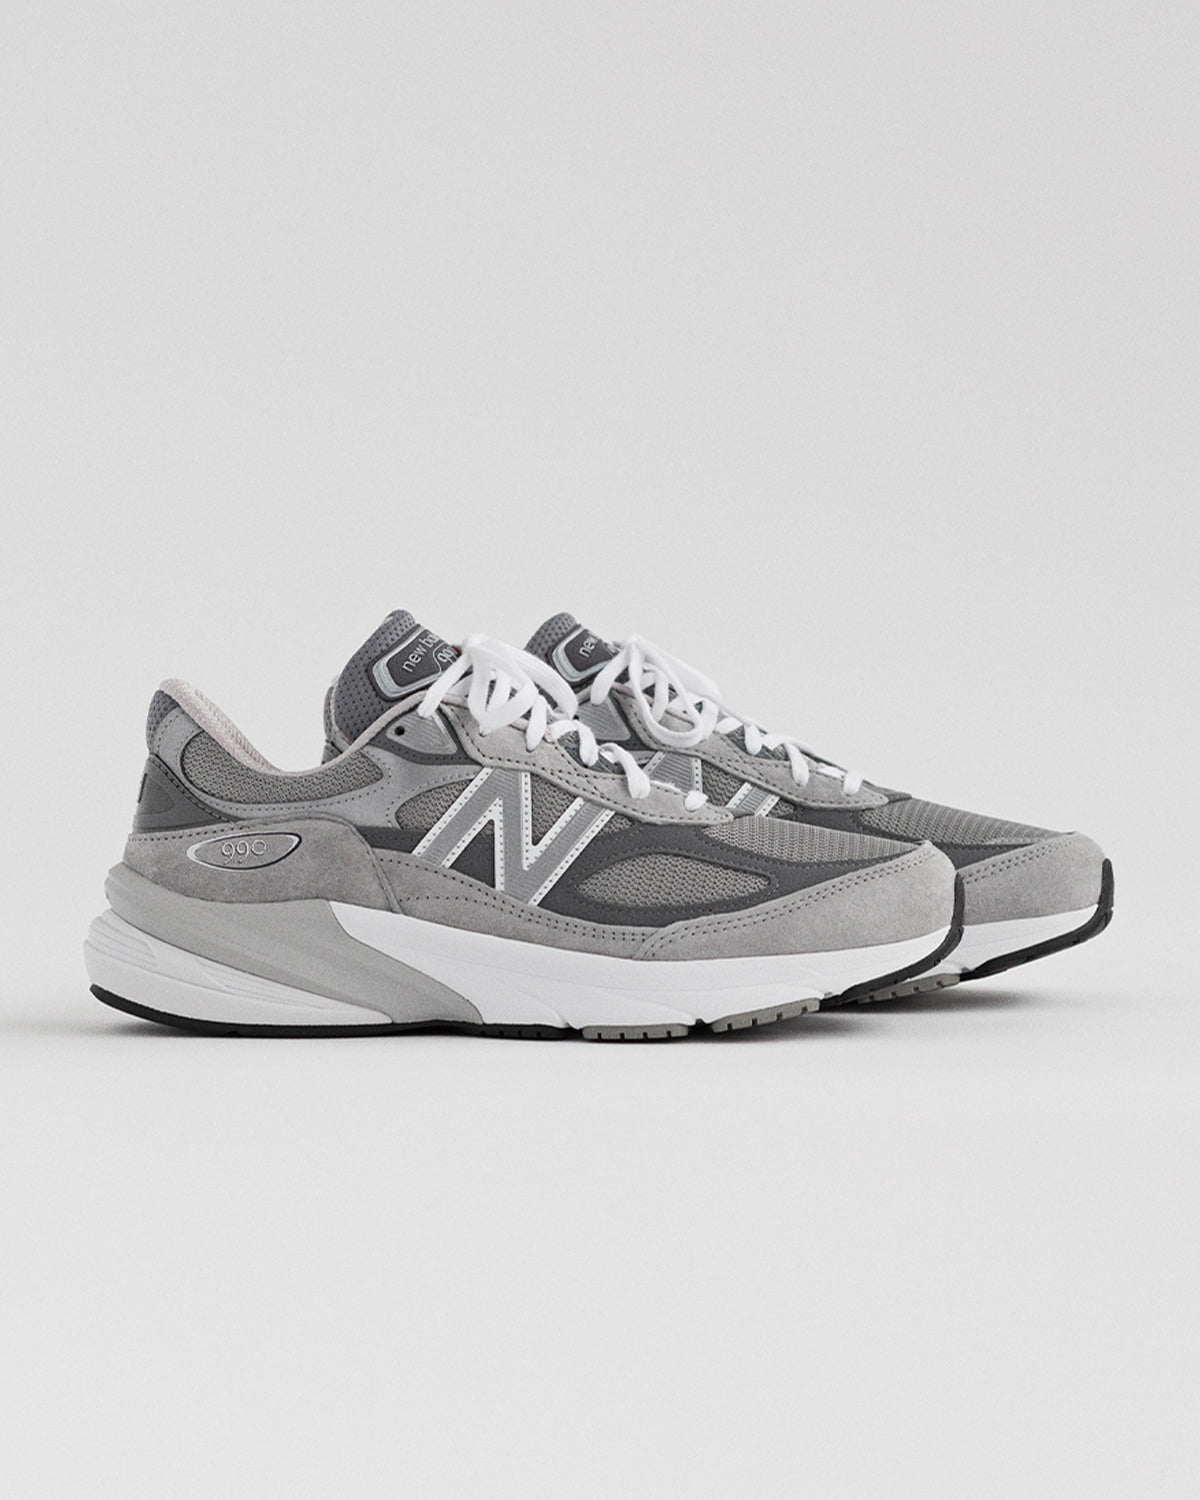 New Balance W's 990v6 Grey Shoes Sneakers Women